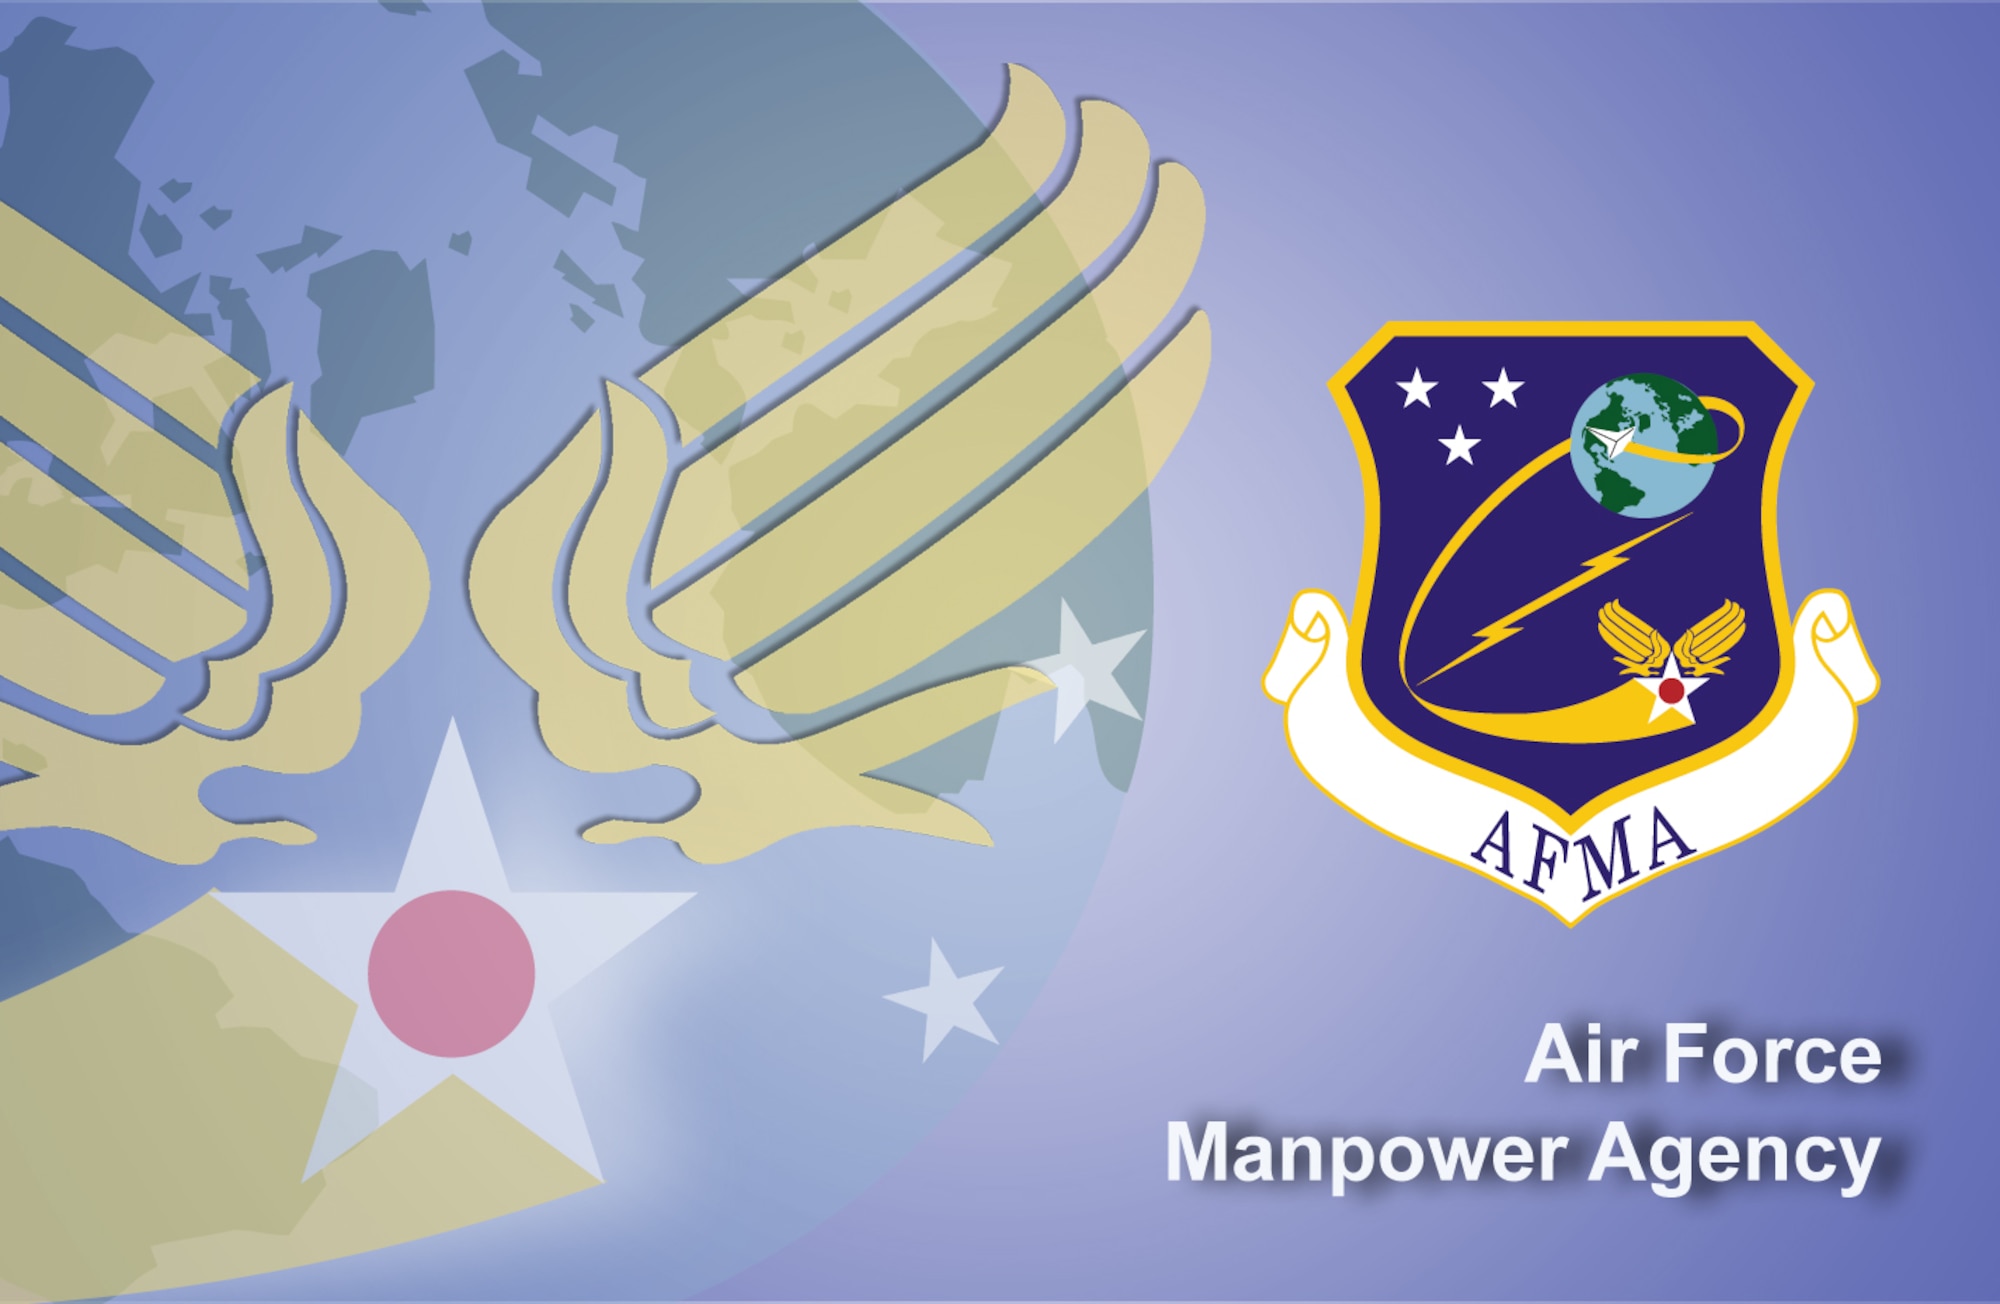 Rather than determining manpower needs within units using potentially inefficient practices, the Air Force Manpower Analysis Agency, or AFMAA developed a new process to ensure personnel are performing duties in the most effective manner prior to developing manpower standards. 
The Enterprise Process Improvement, or EPI, was created in partnership with the Office of Business Transformation and Air Force Deputy Chief Management Officer function, or SAF/MG, to analyze and evaluate organizations on current processes and provide assistance in areas that need improvement. 
